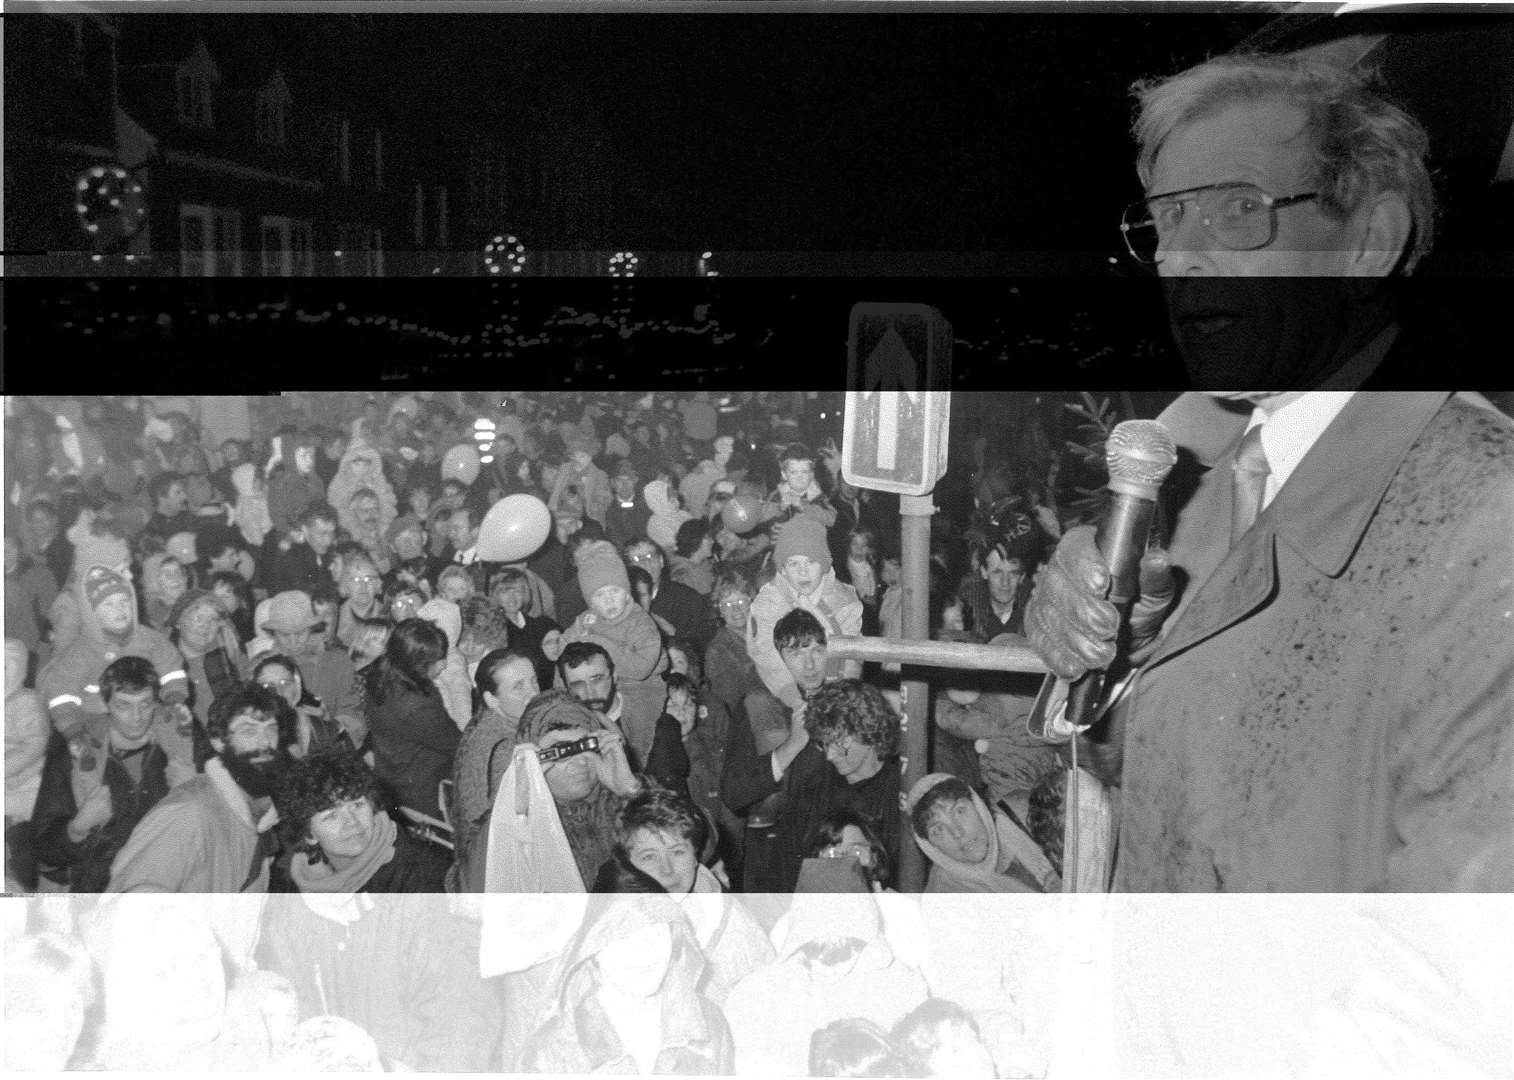 Bob Holness at a lights switch-on event in Ashford in 1989